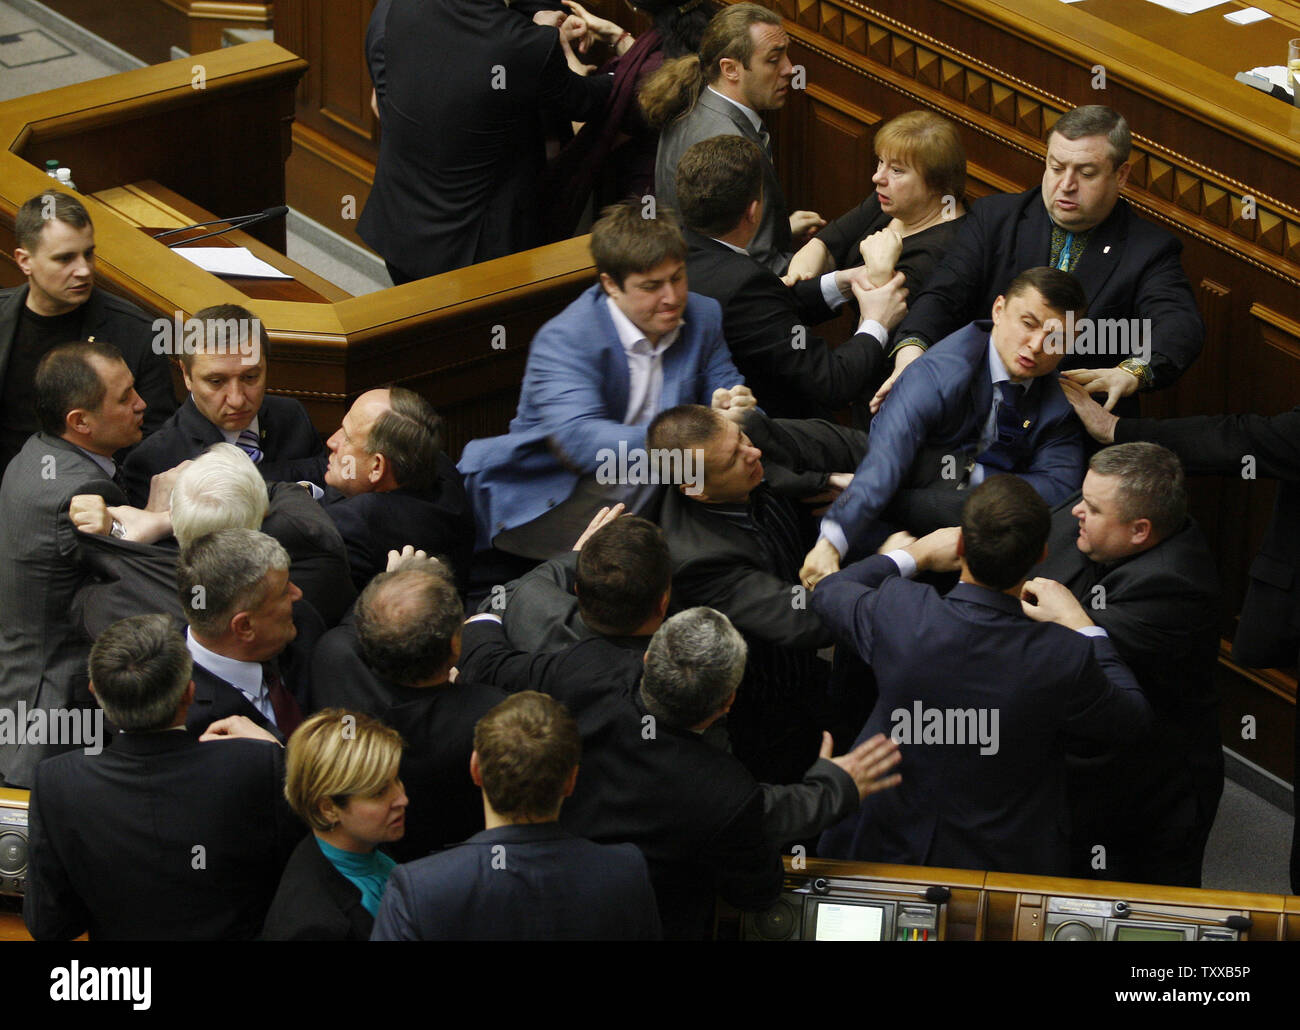 Ukrainian lawmakers from Communist Party and the radical nationalist right-wing Svoboda (Freedom) Party fight during a parliament session in Kiev on April 8, 2014.    The fight was provoked by different opinions on what is causing the unrest in eastern Ukraine.   UPI/Ivan Vakolenko Stock Photo